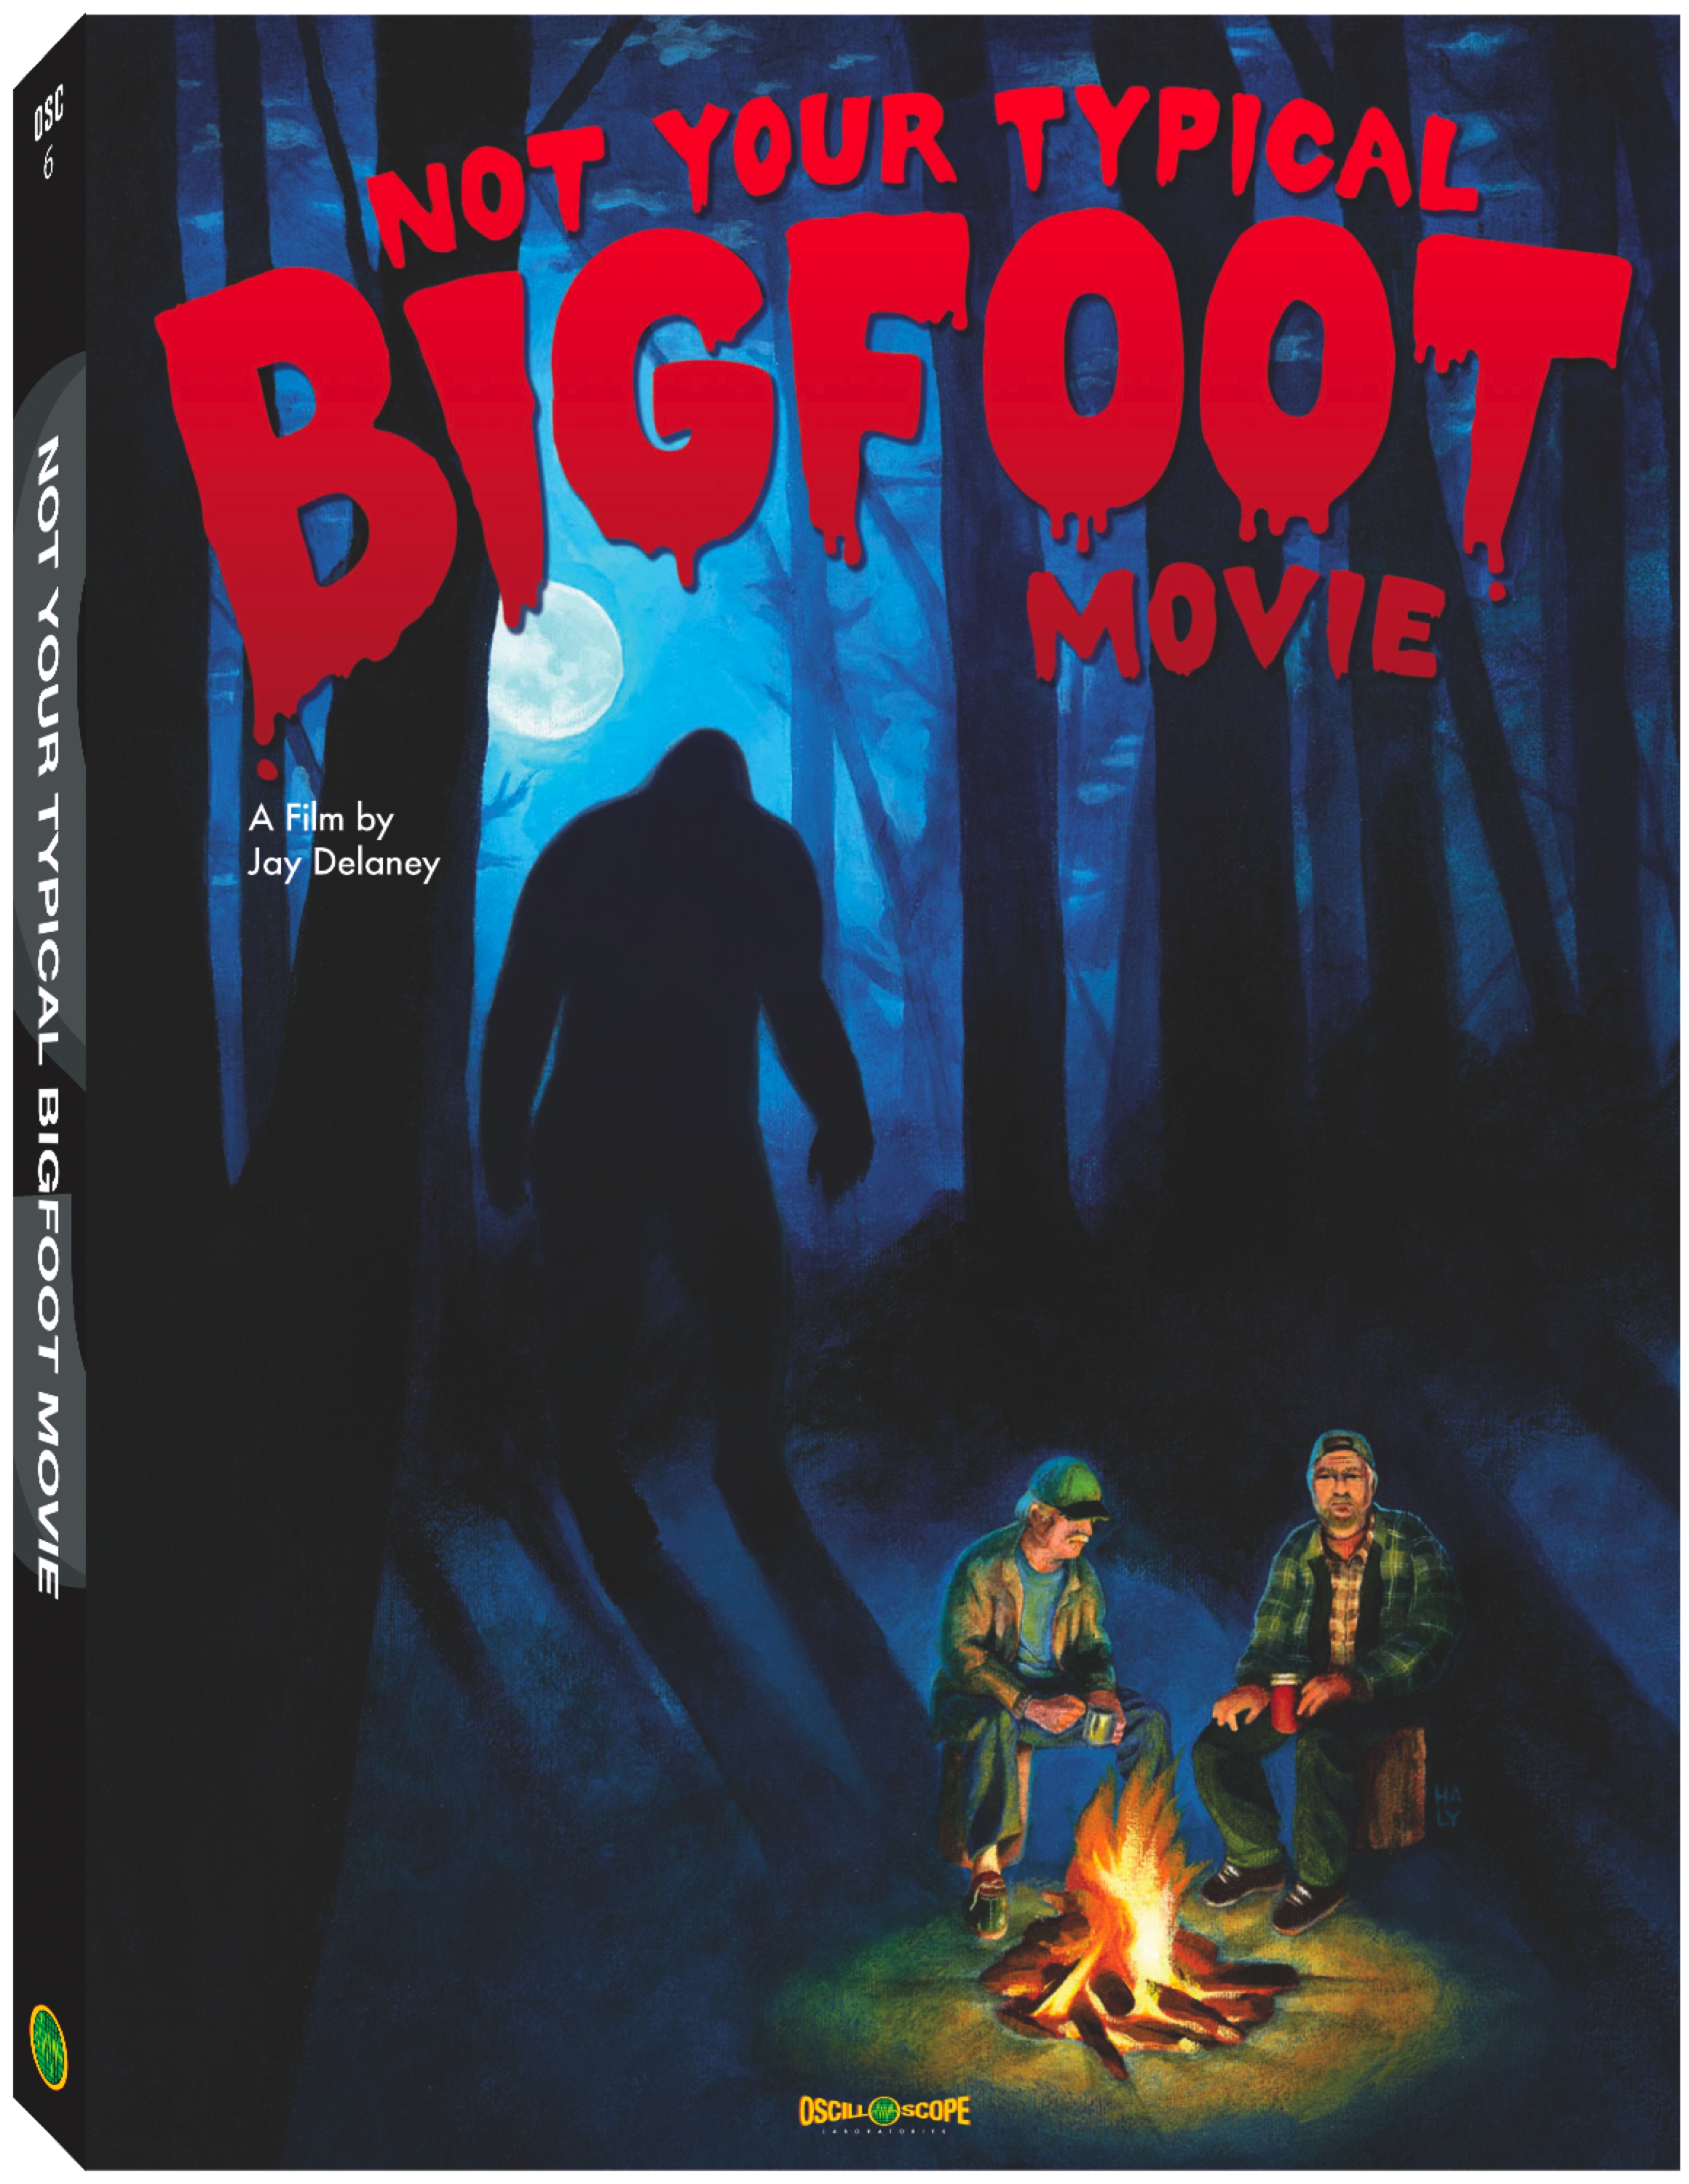 NOT YOUR TYPICAL BIGFOOT MOVIE / (WS)